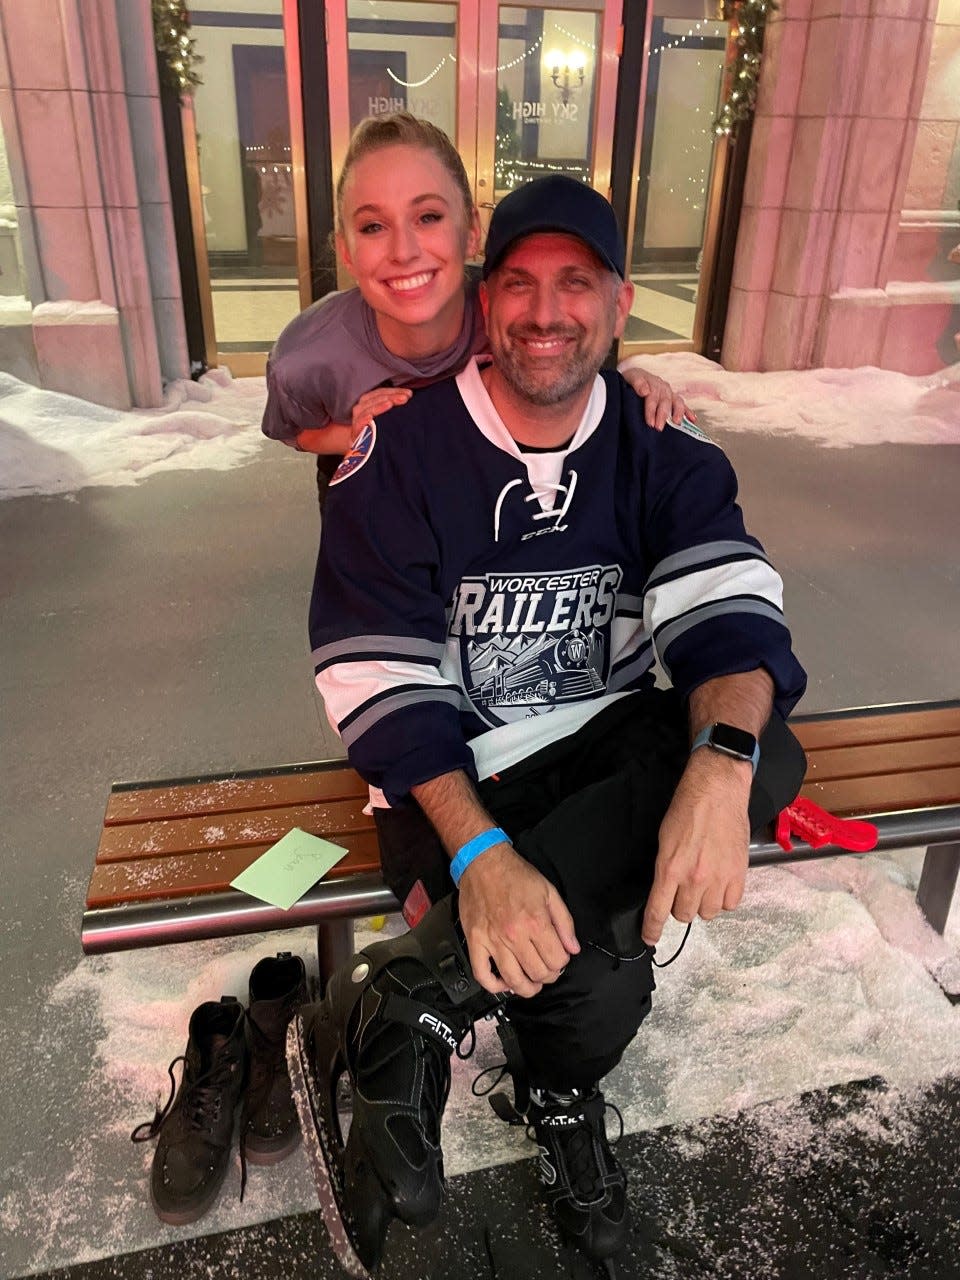 “Spirited” director/co-scriptwriter Sean Anders wearing his prized Worcester Railers hockey jersey that he bought when he filmed scenes for the movie in Worcester. With Anders is the film’s ice skating coordinator, Madeleine Gallagher.